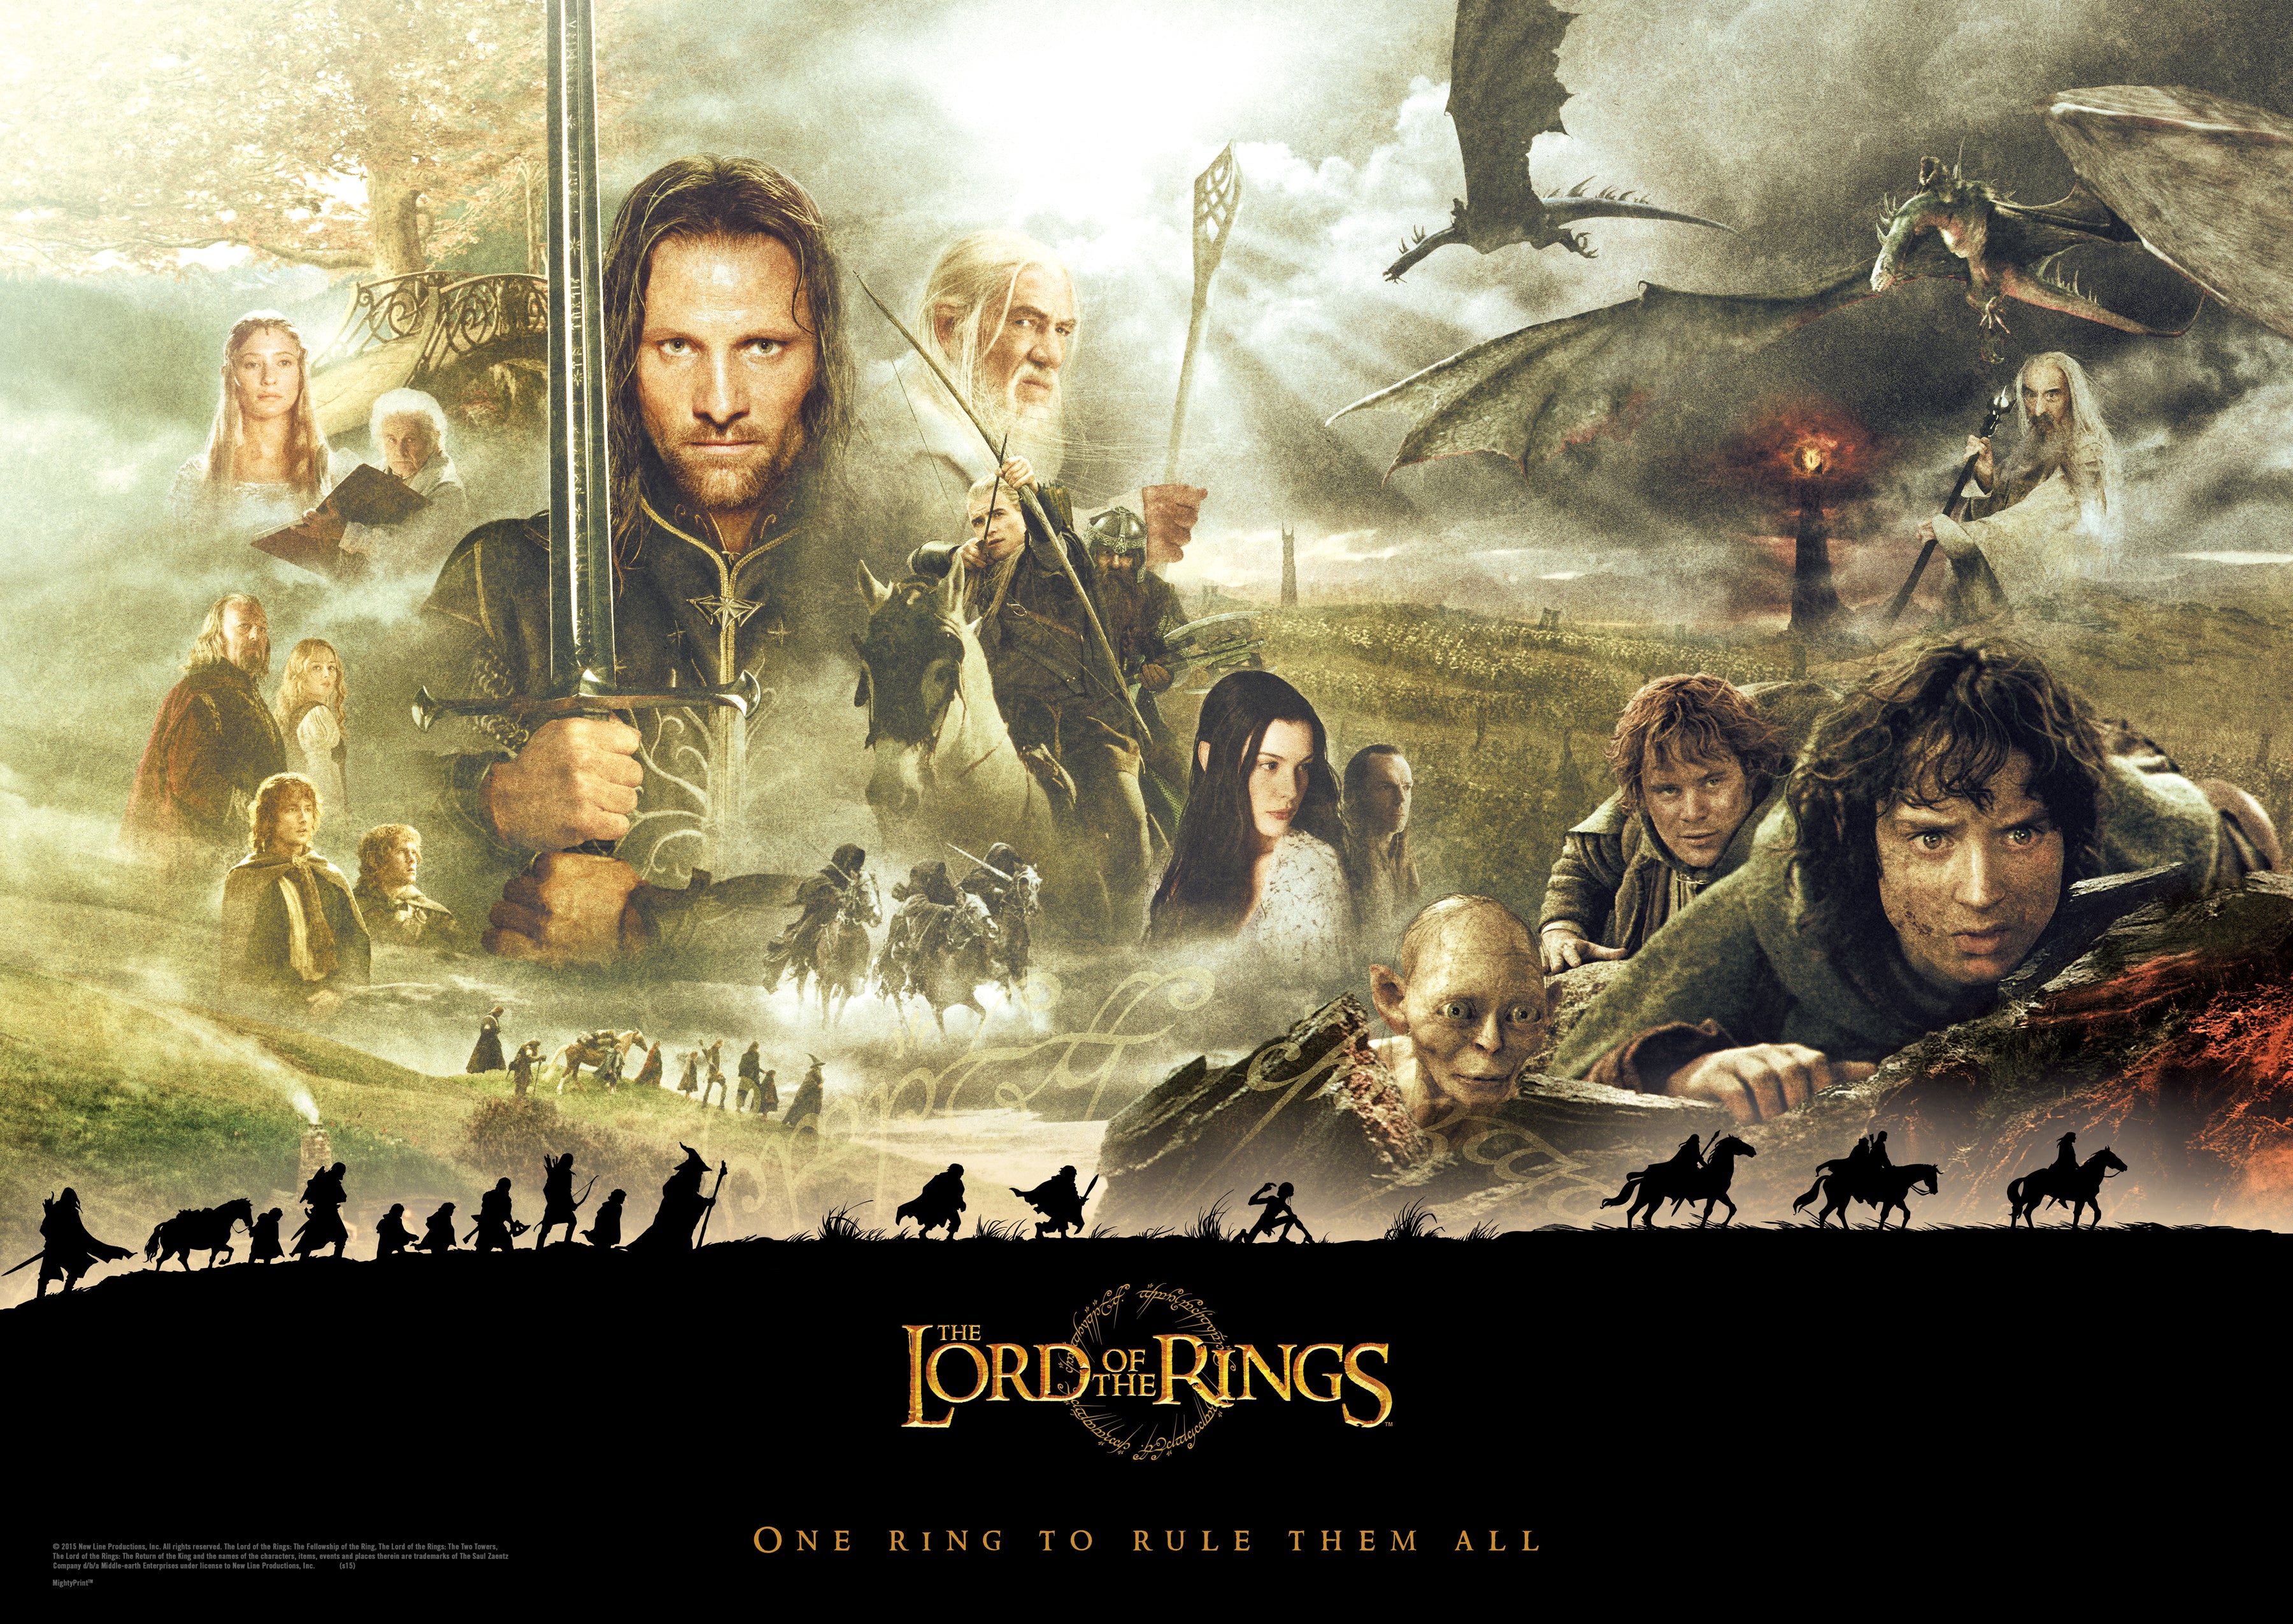 The Lord of the Rings (The Journey) MightyPrintTM Wall Art MP24170120